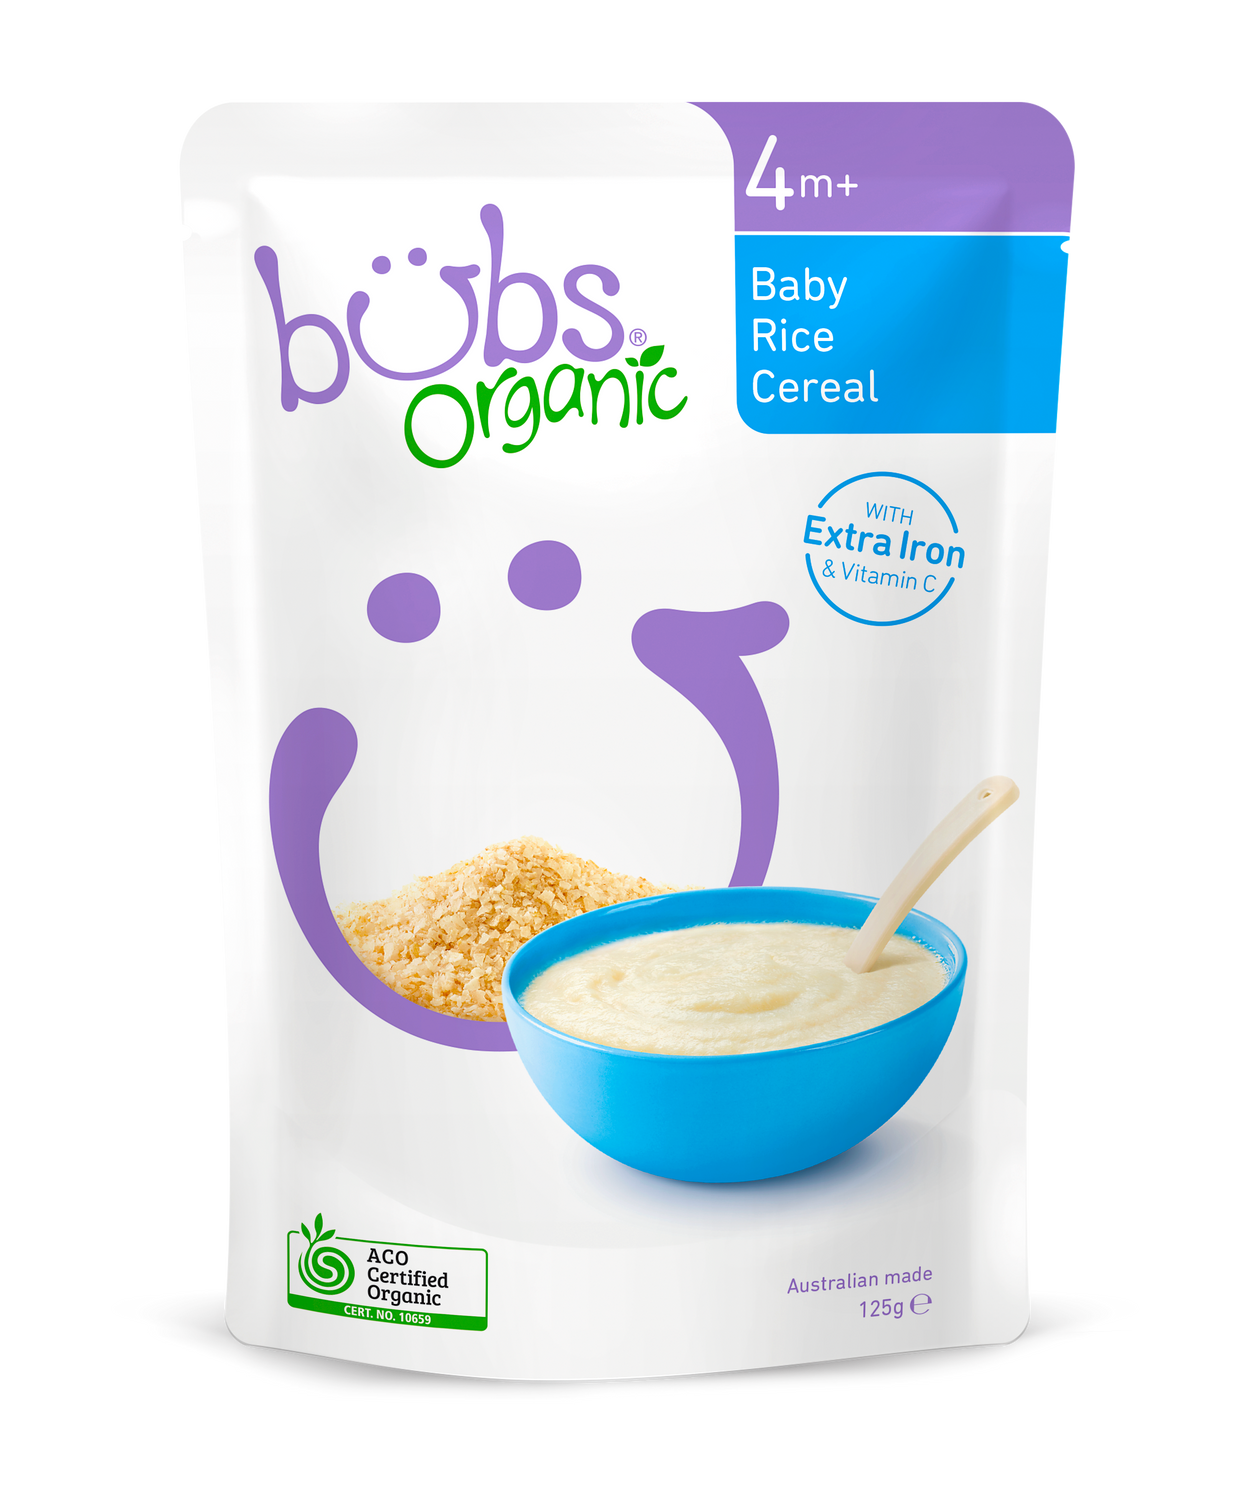 How to Prepare CERELAC Baby Rice, Infant Cereal